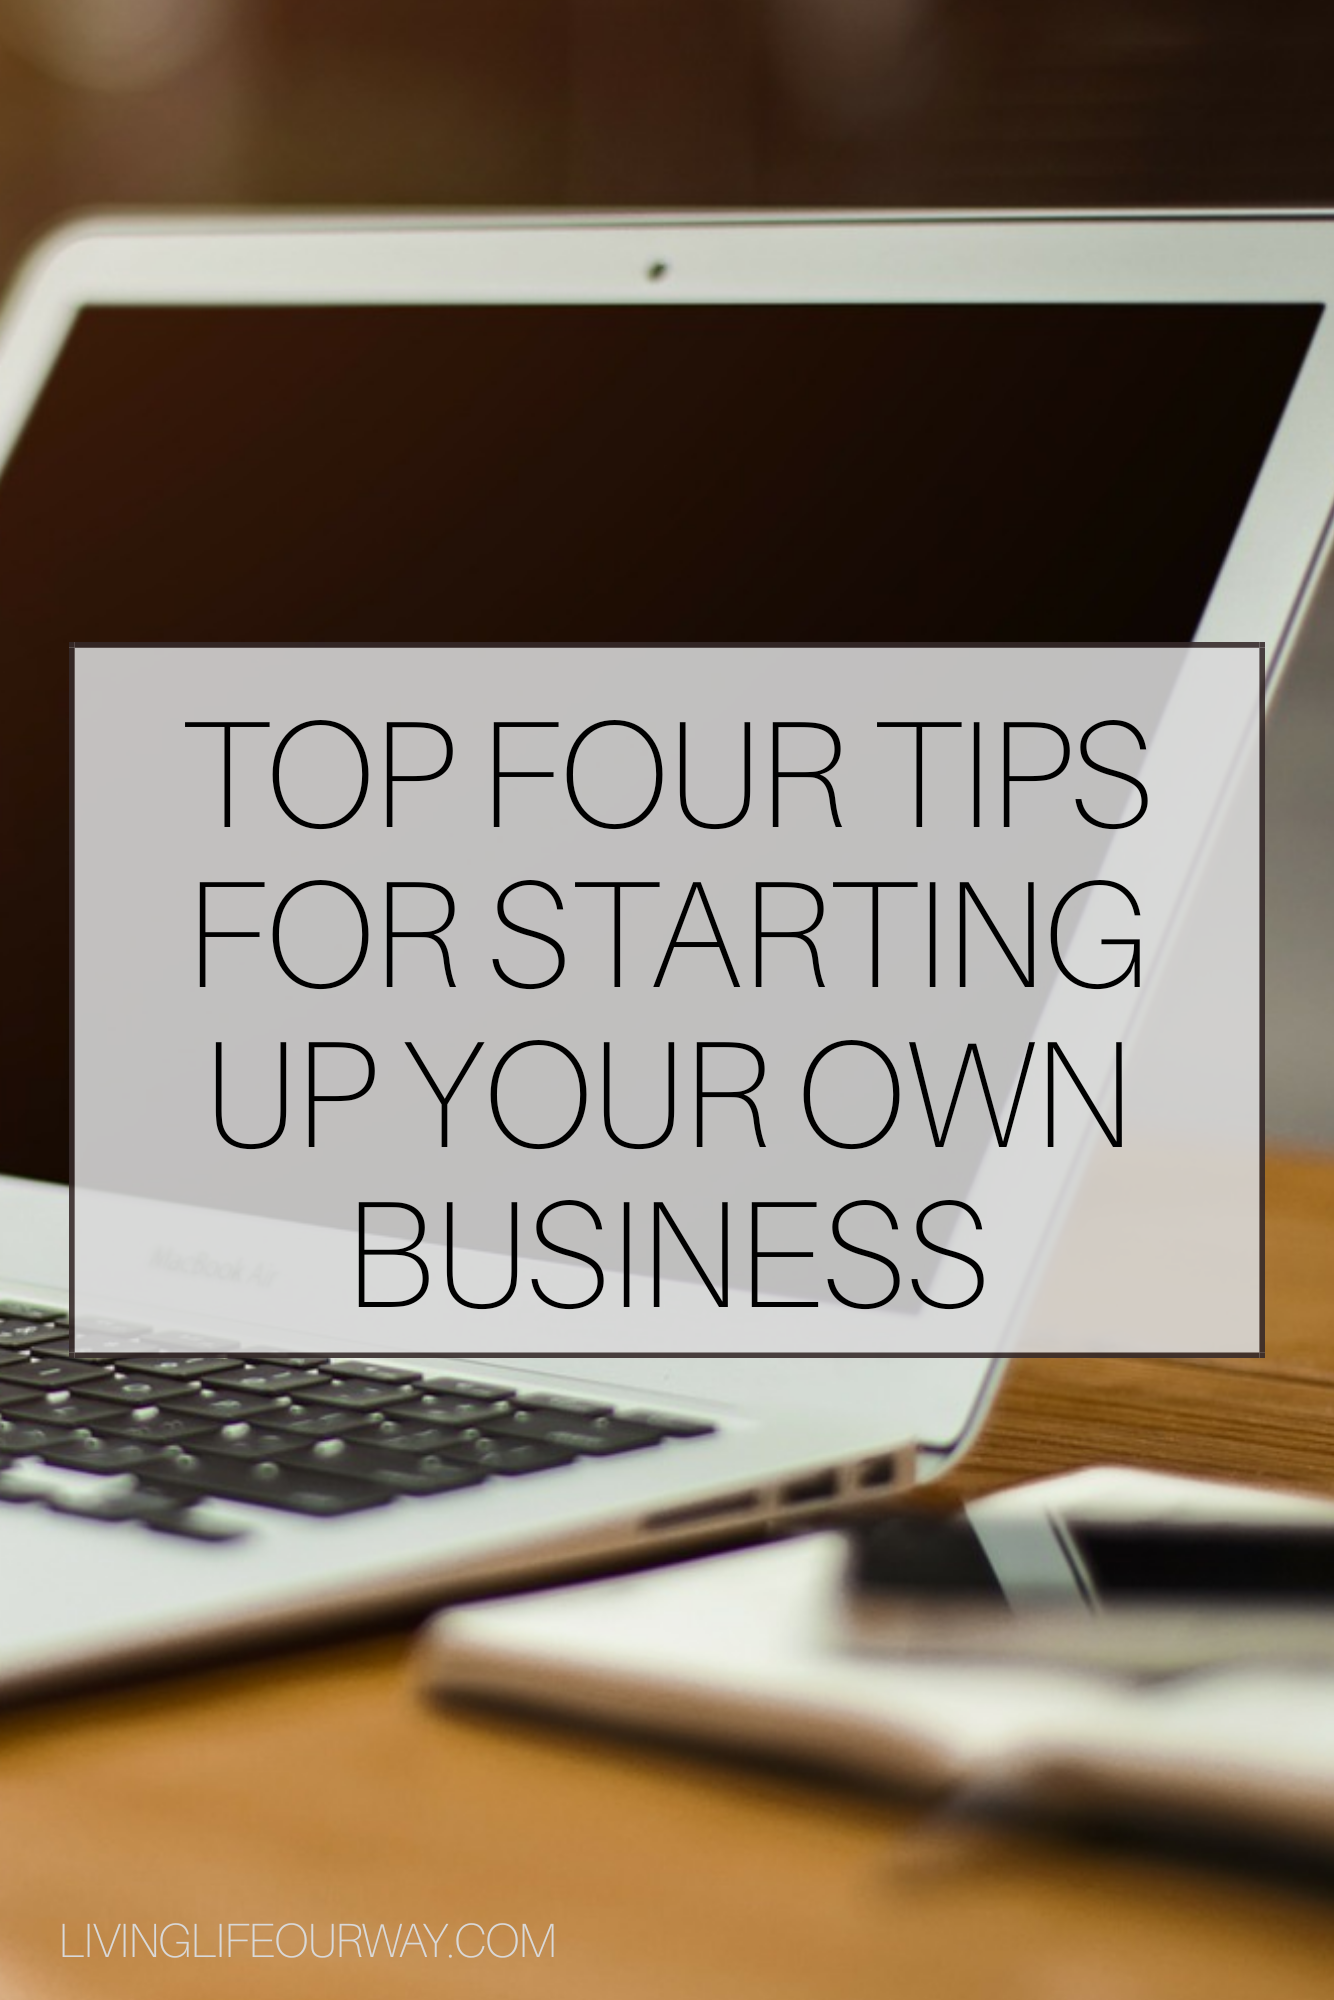 Top four tips for starting up your own business